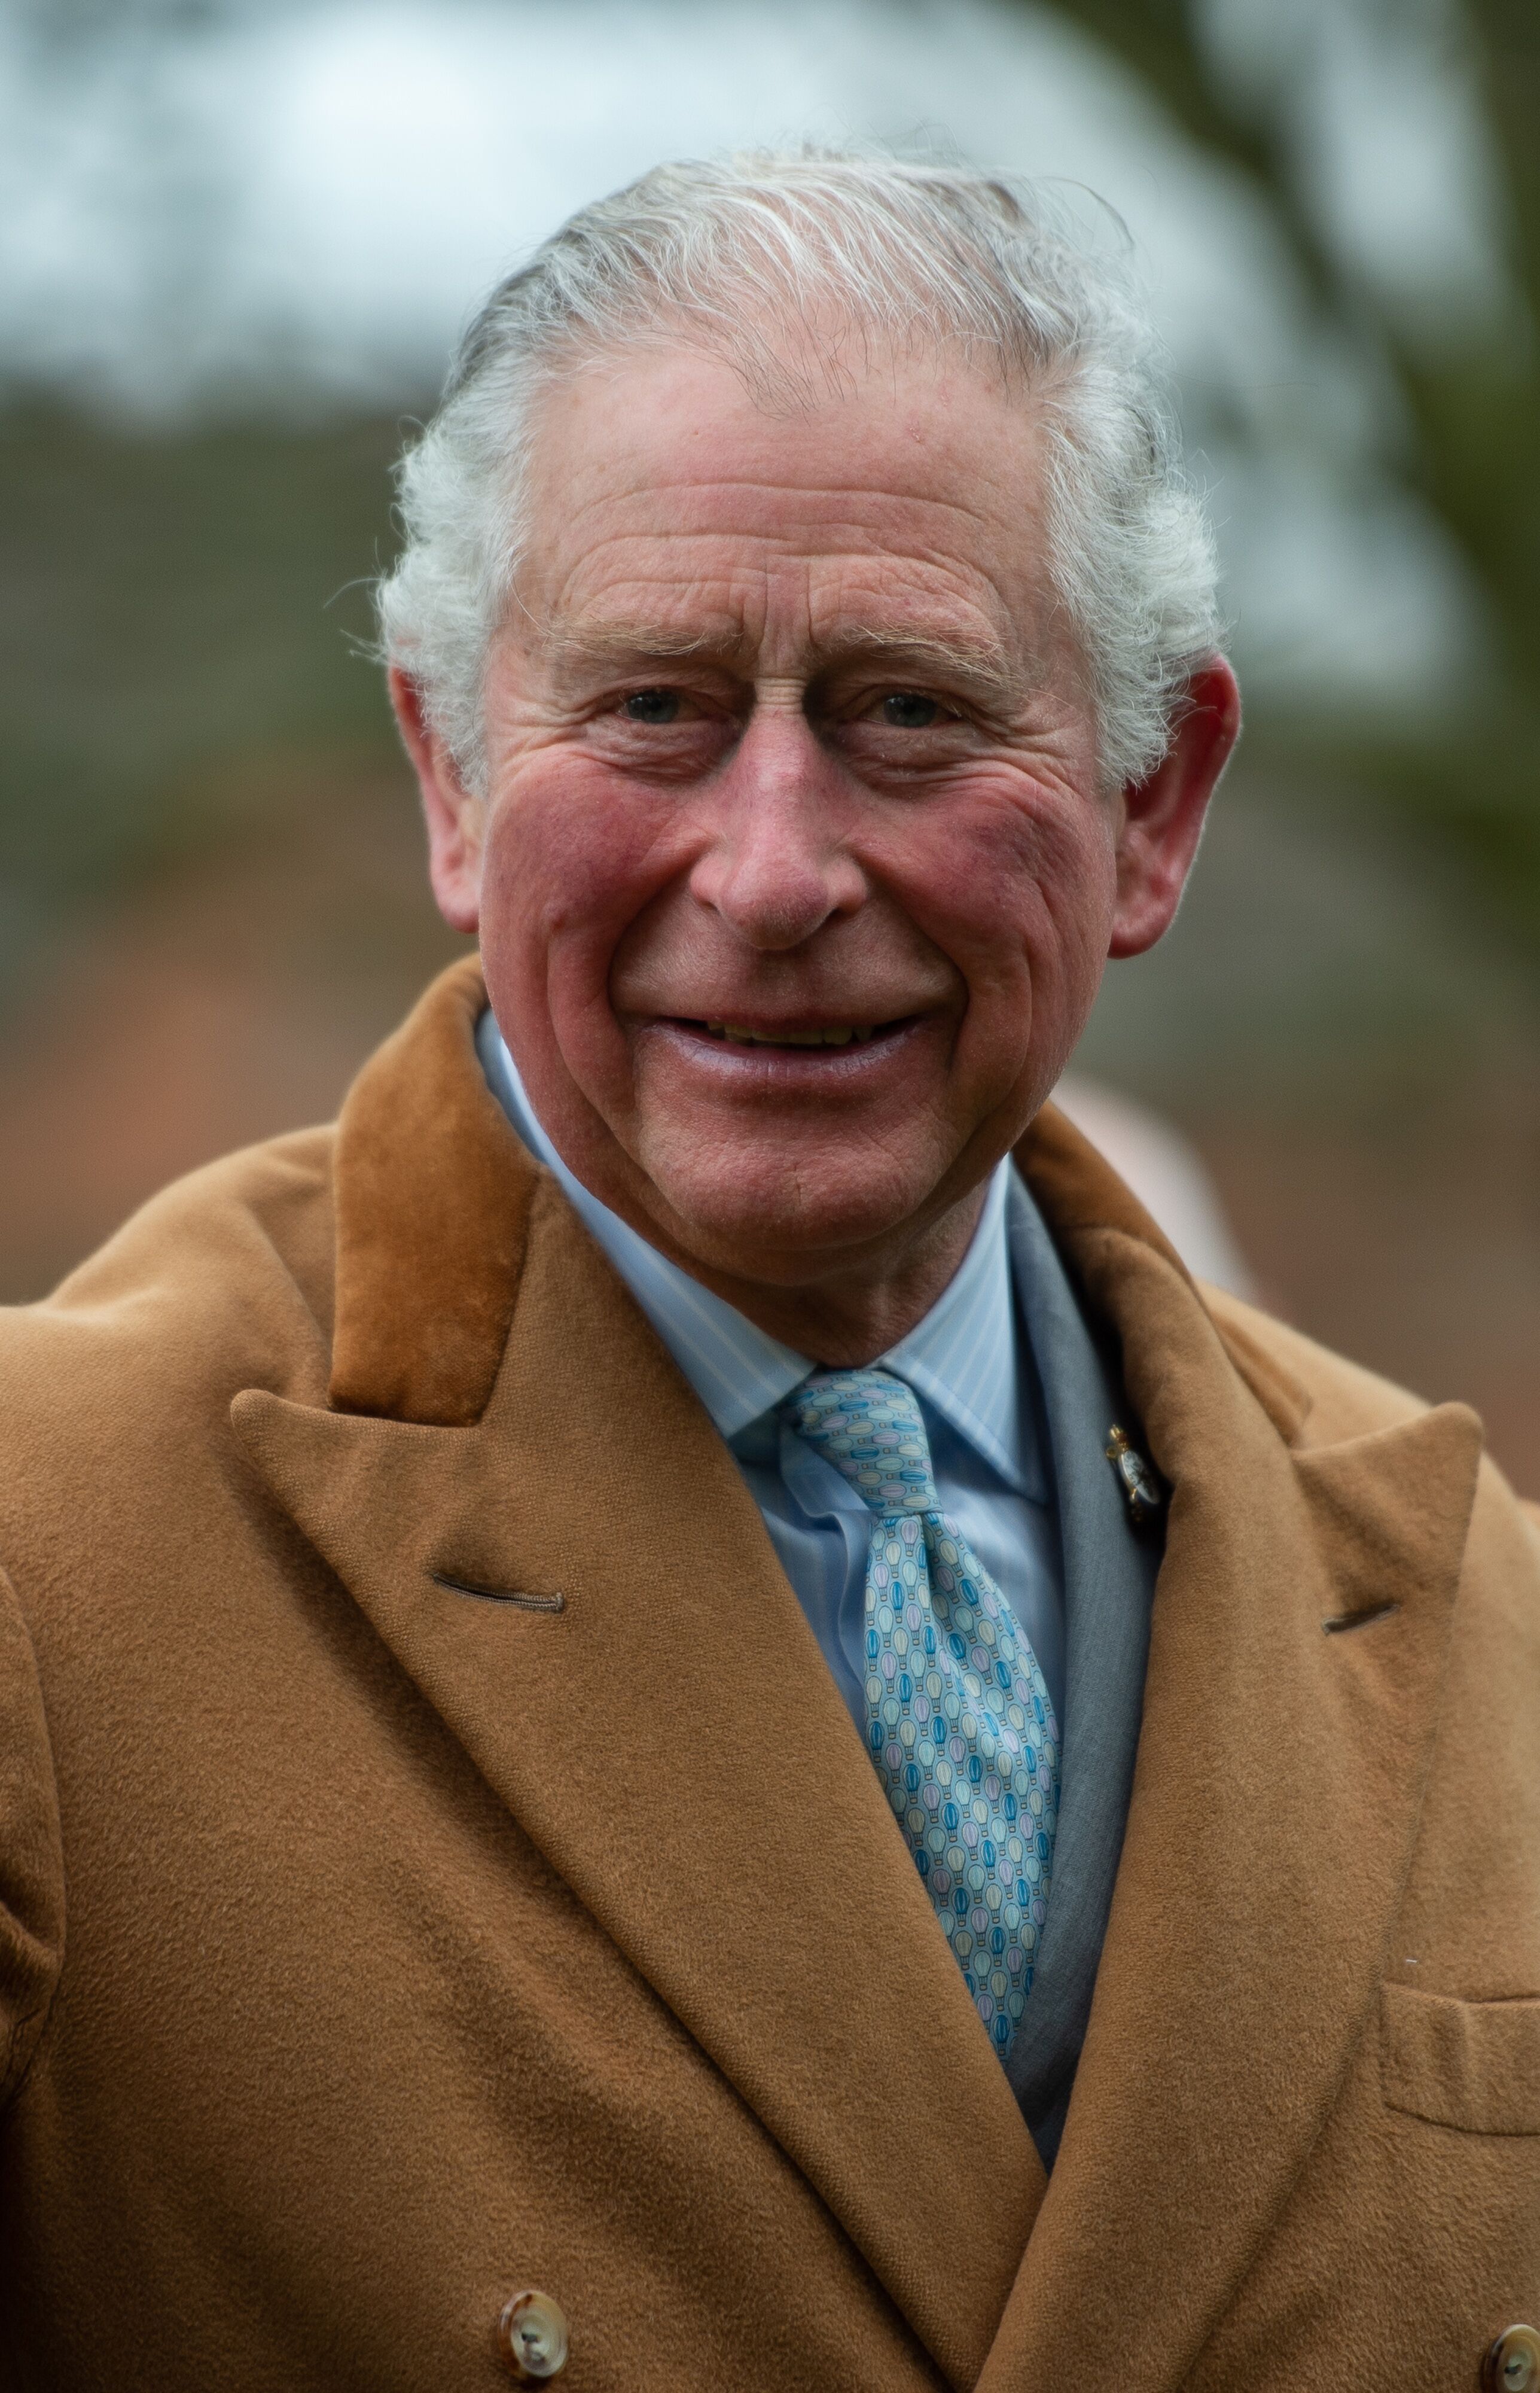 Prince Charles at the Nicholas Chamberlaine Almshouses in Bedworth, during a tour of Warwickshire and the West Midlands on February 18, 2020 | Photo: Joe Giddens/PA Images/Getty Images